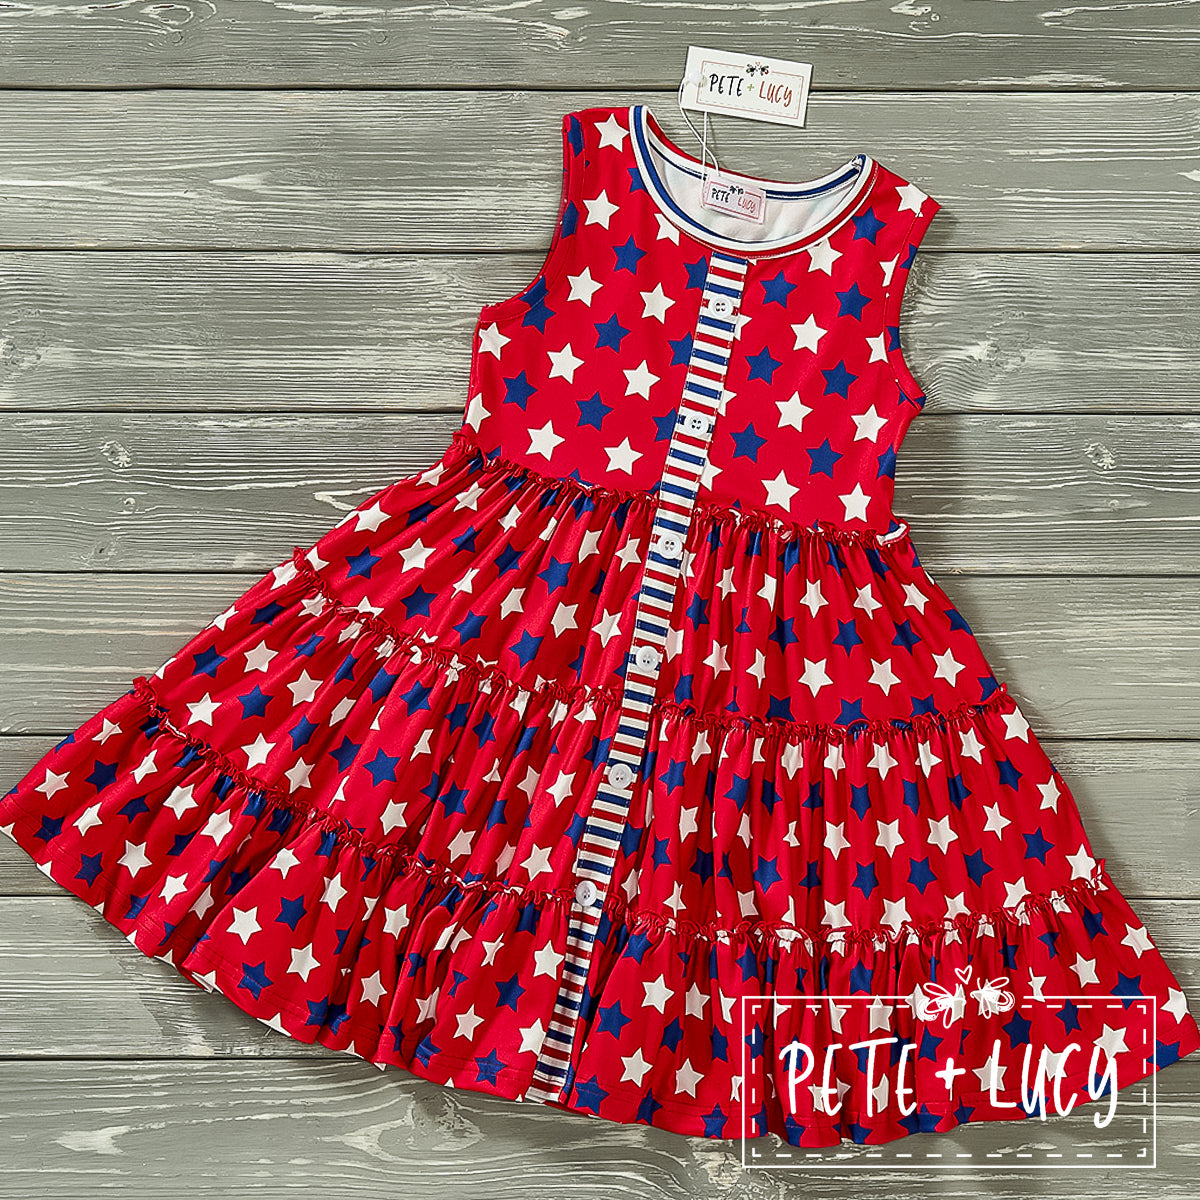 Home of the Brave: Girl Dress